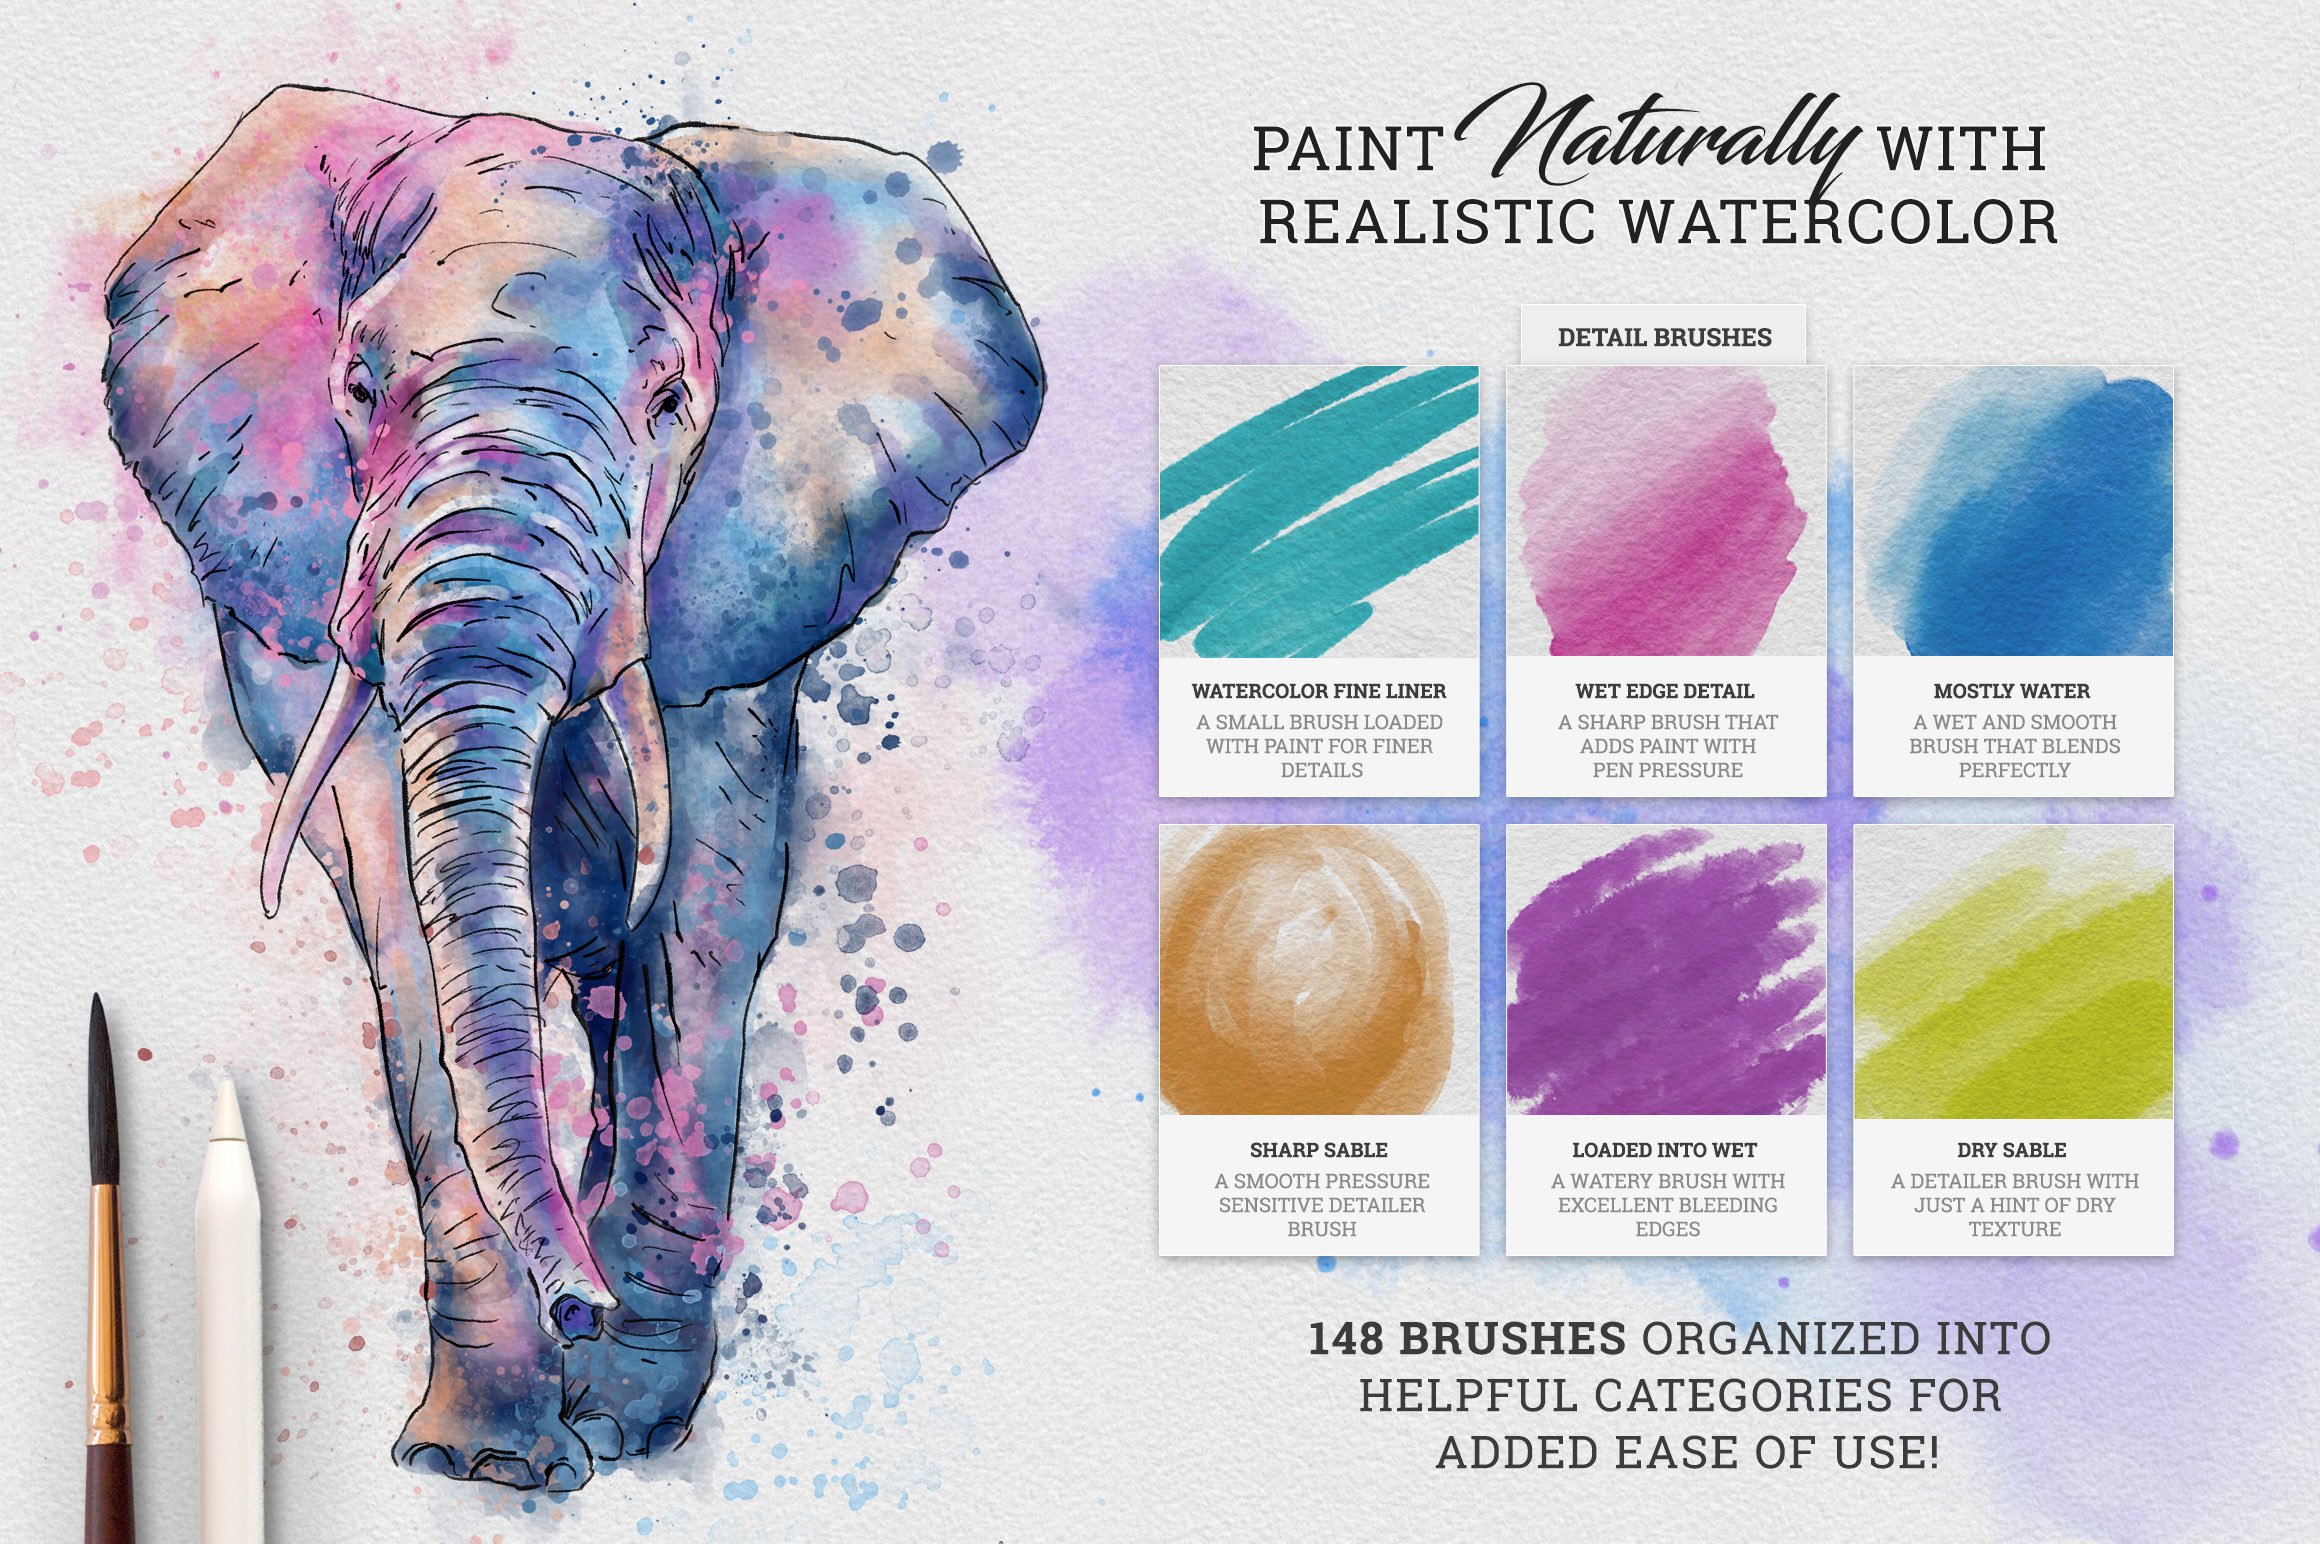 Paint naturally with realistic watercolor brushes.